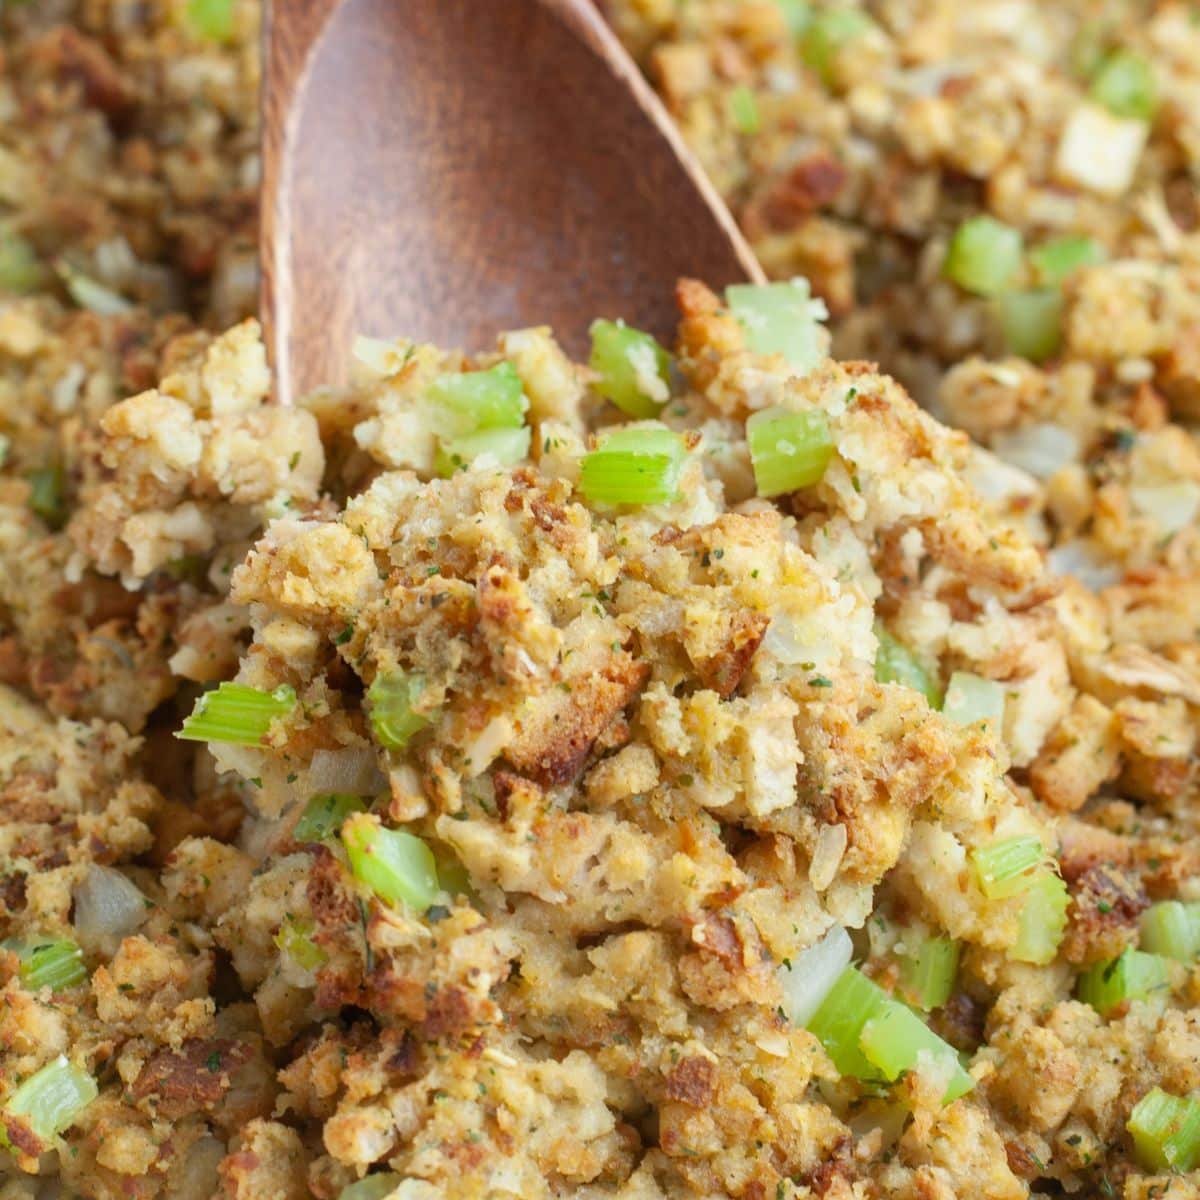 5 Easy Ways to Upgrade Boxed Stuffing